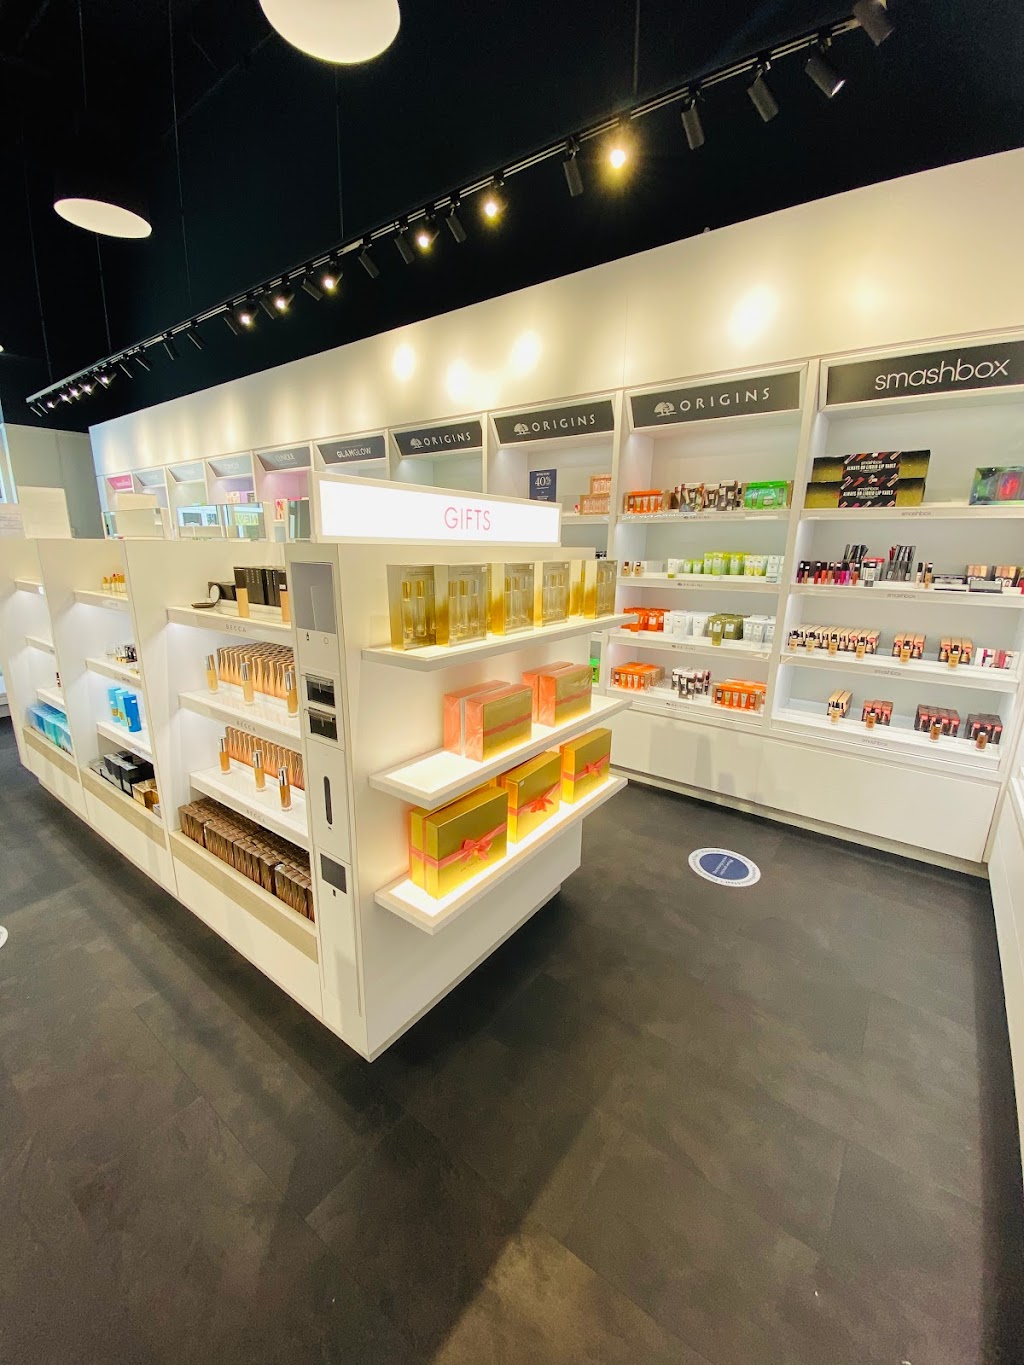 The Cosmetics Company Store | 300 Taylor Rd Space 615, Niagara-on-the-Lake, ON L0S 1J0, Canada | Phone: (905) 684-5171